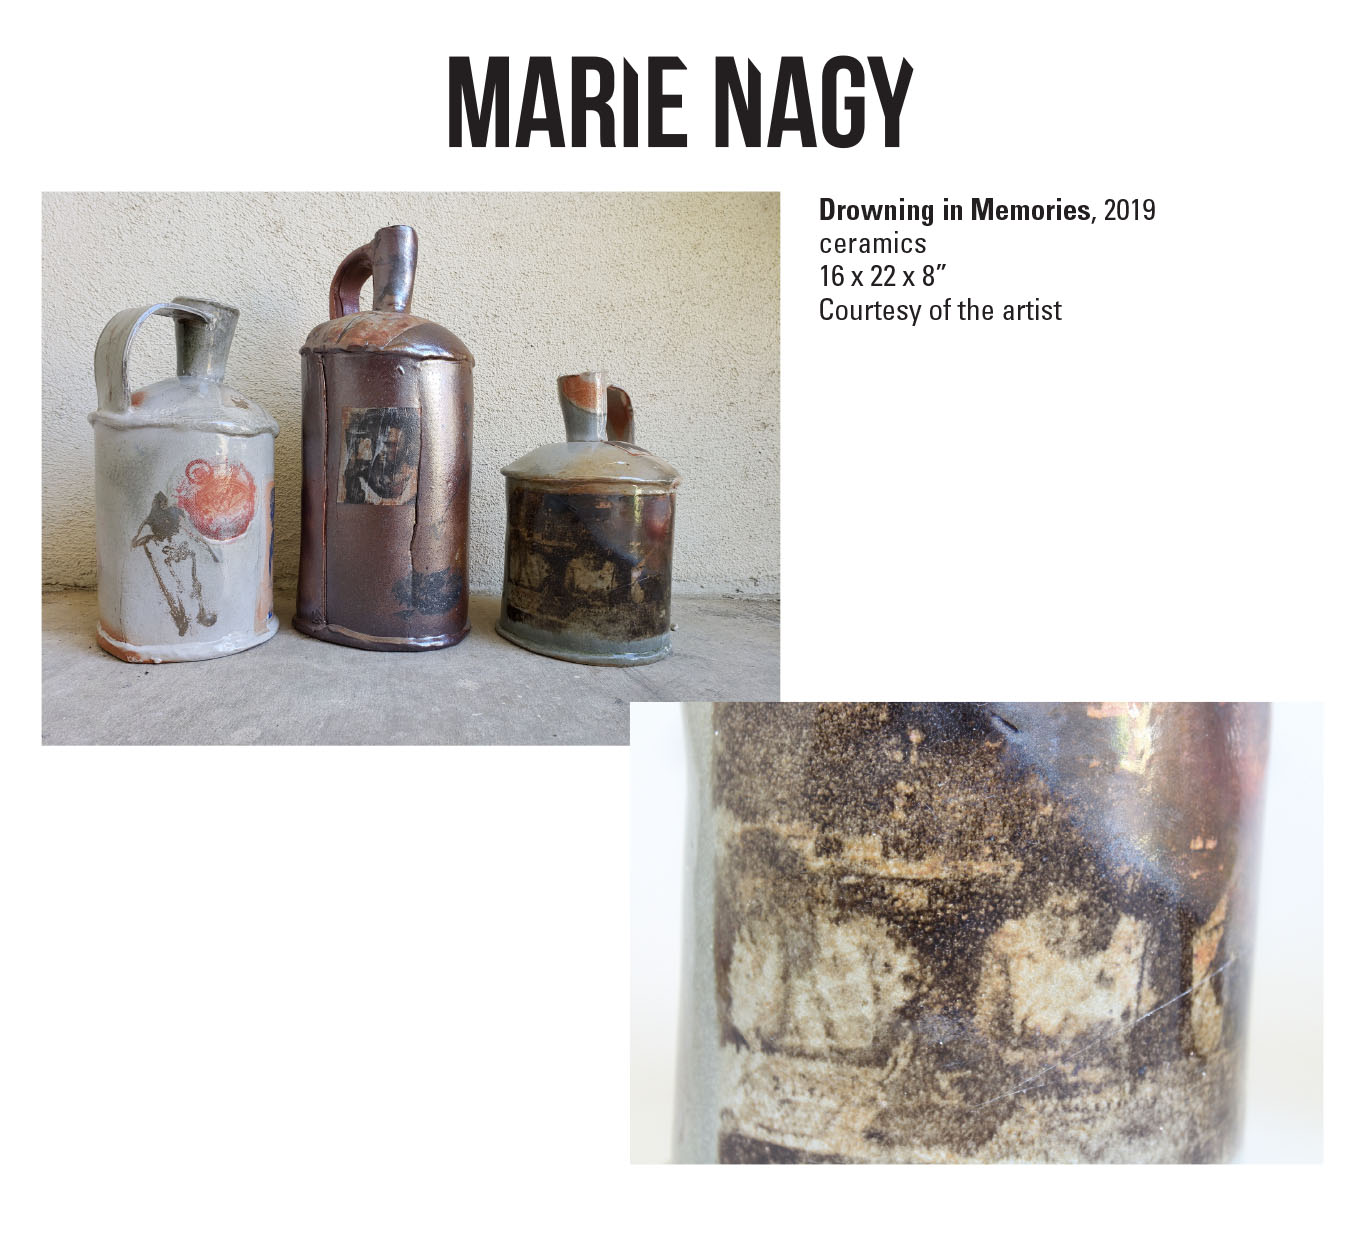 Marie Nagy, Drowning in Memories, 2019. Ceramics. 16 x 22 x 8” Courtesy of the artist. Three different colored cup-like containers with a handle and spout